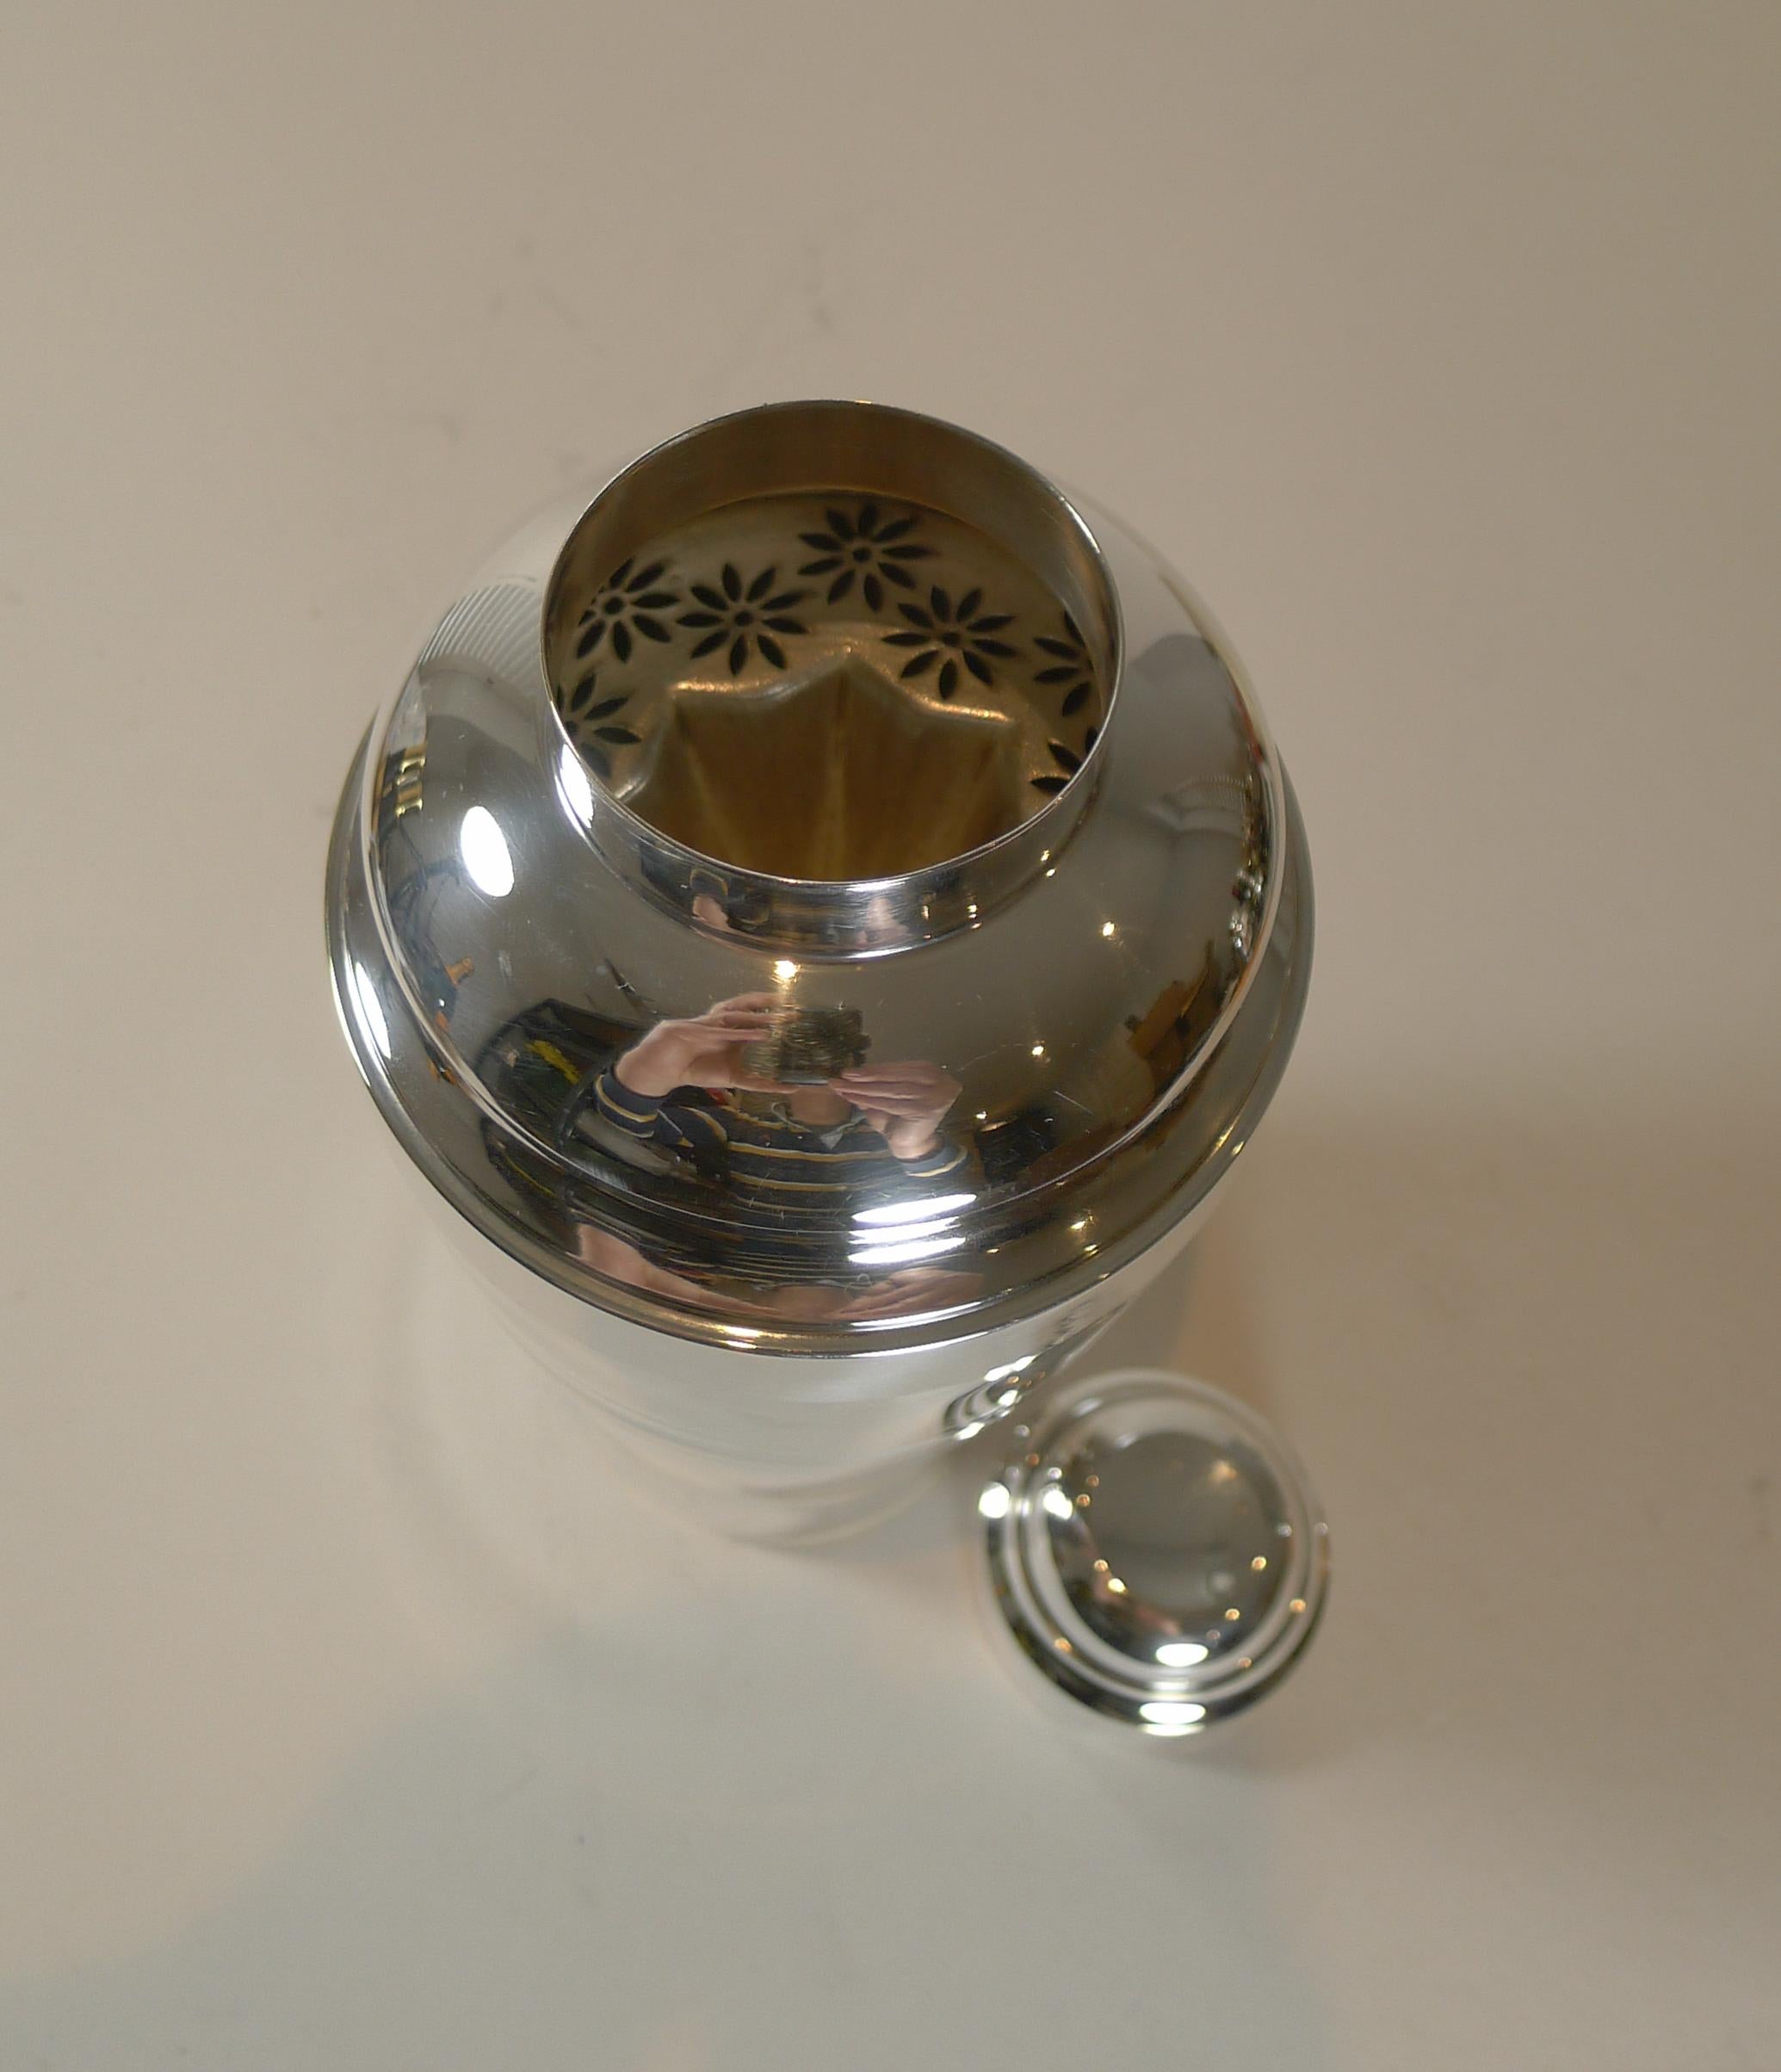 French Art Deco Cocktail Shaker with Lemon Reamer c.1930 by St. Medard, Paris For Sale 2